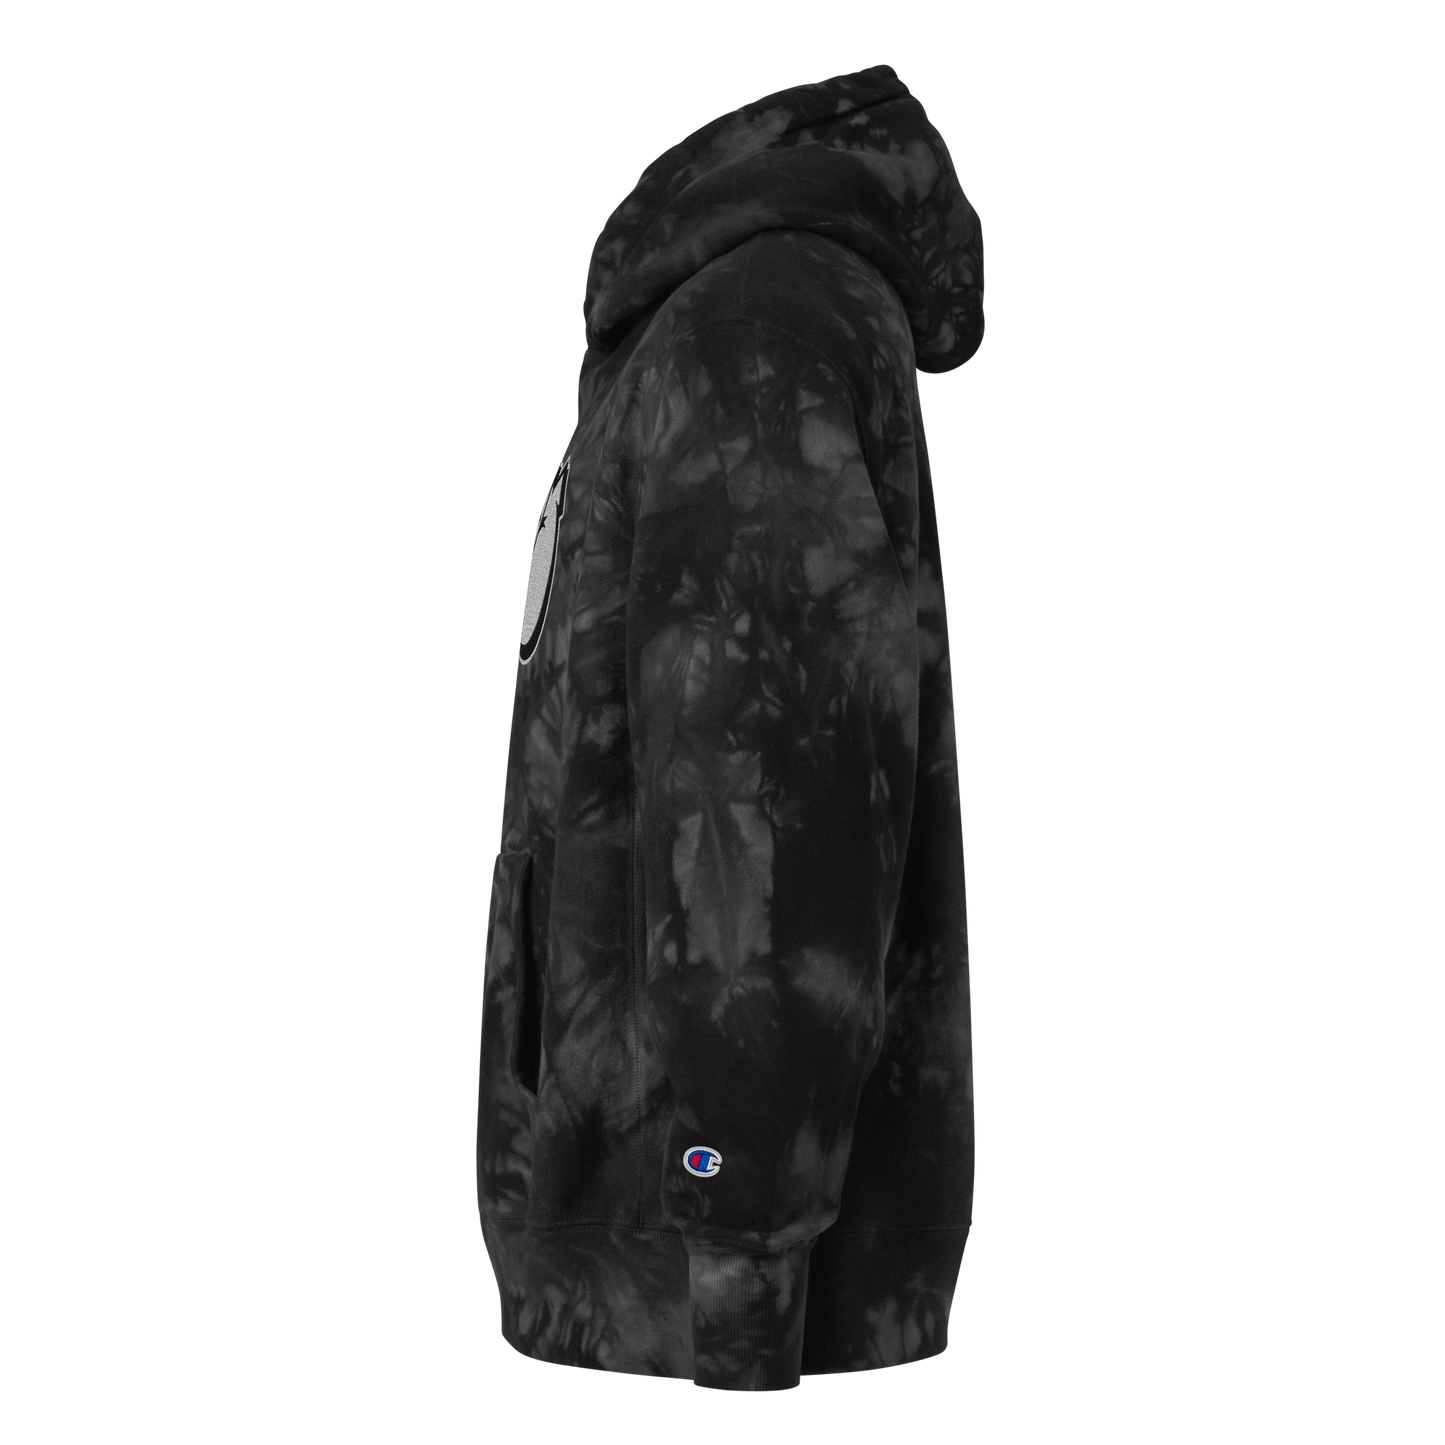 Embroidered EY3 Champion tie-dye hoodie